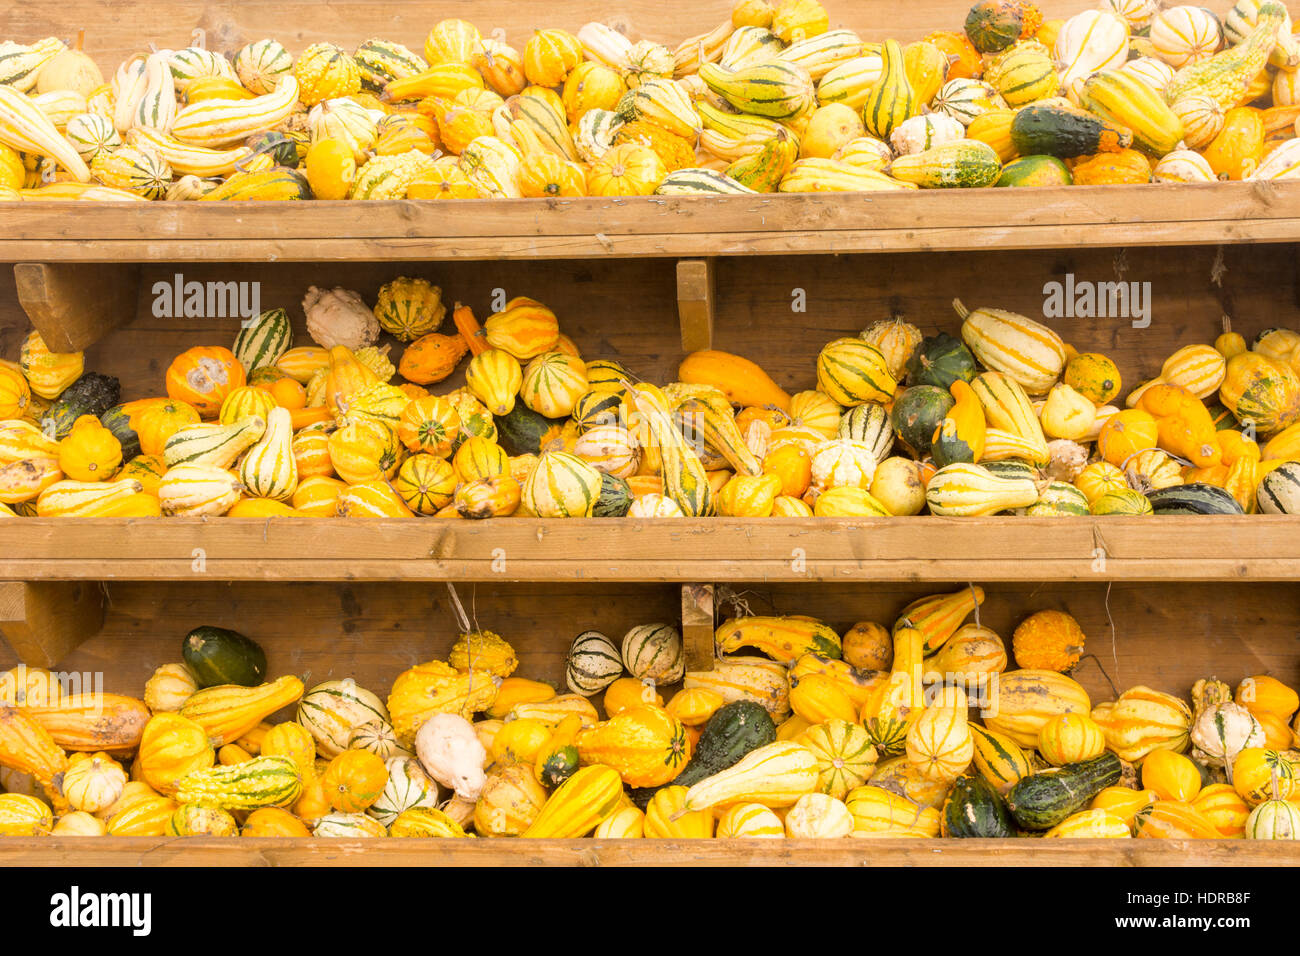 Lots of pumpkins in a shelf at the market Stock Photo